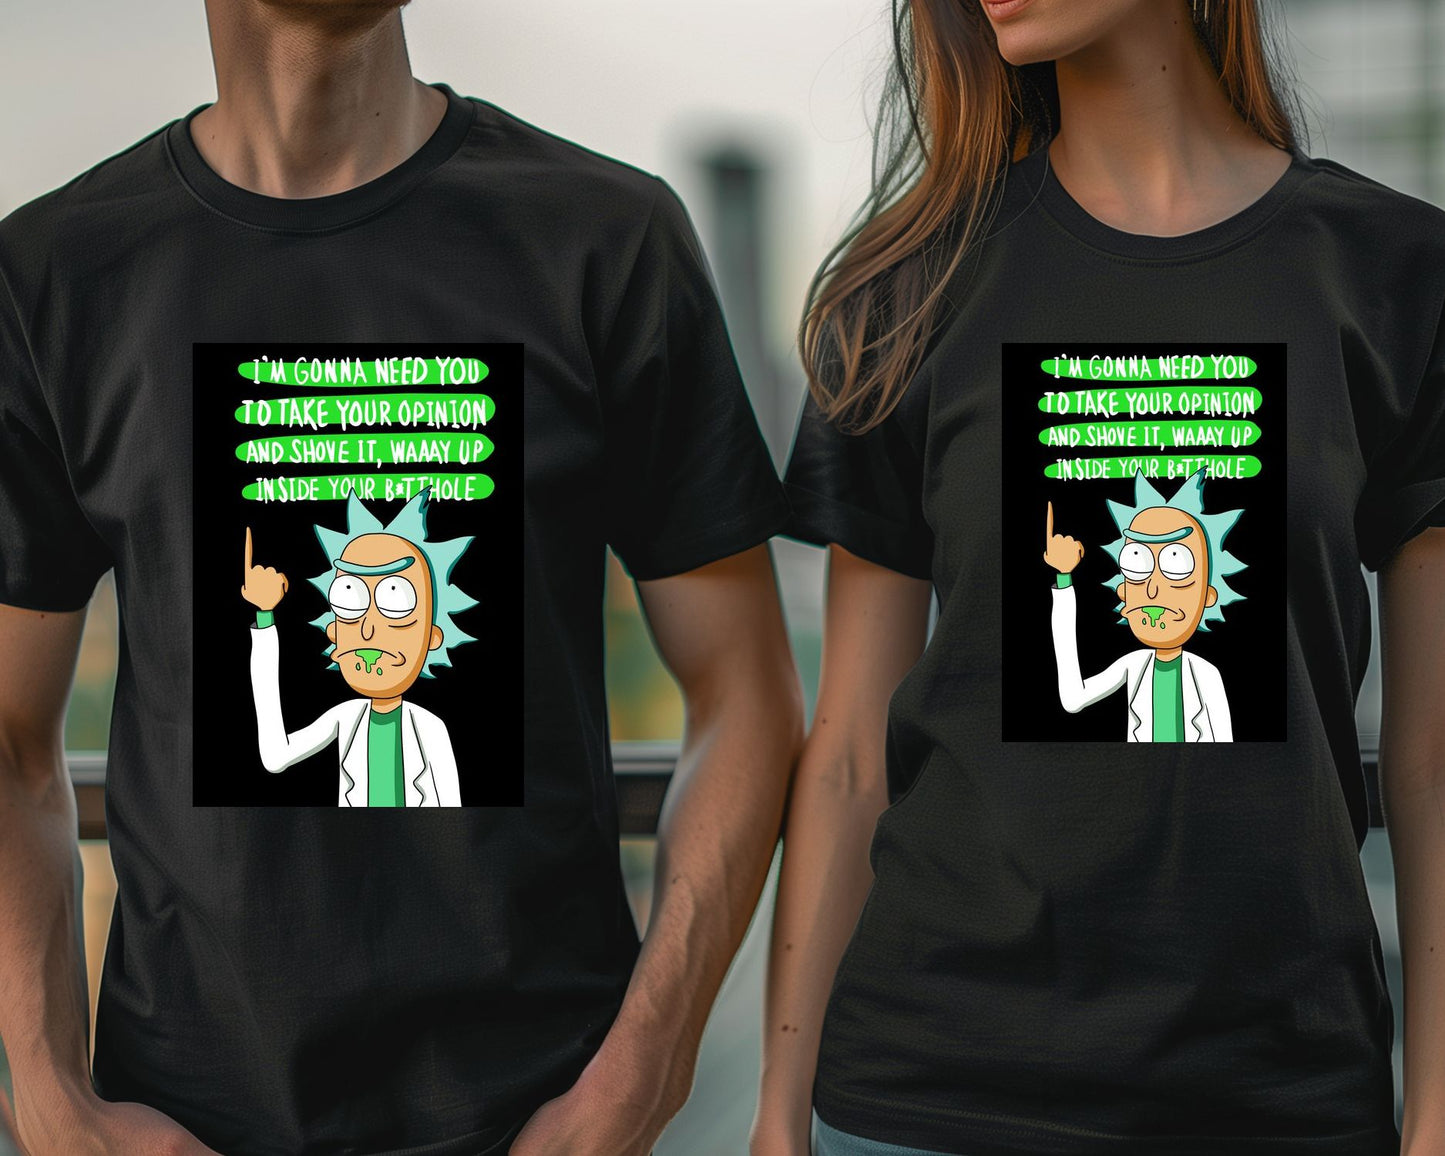 Rick and morty quotes 9 - @Yoho